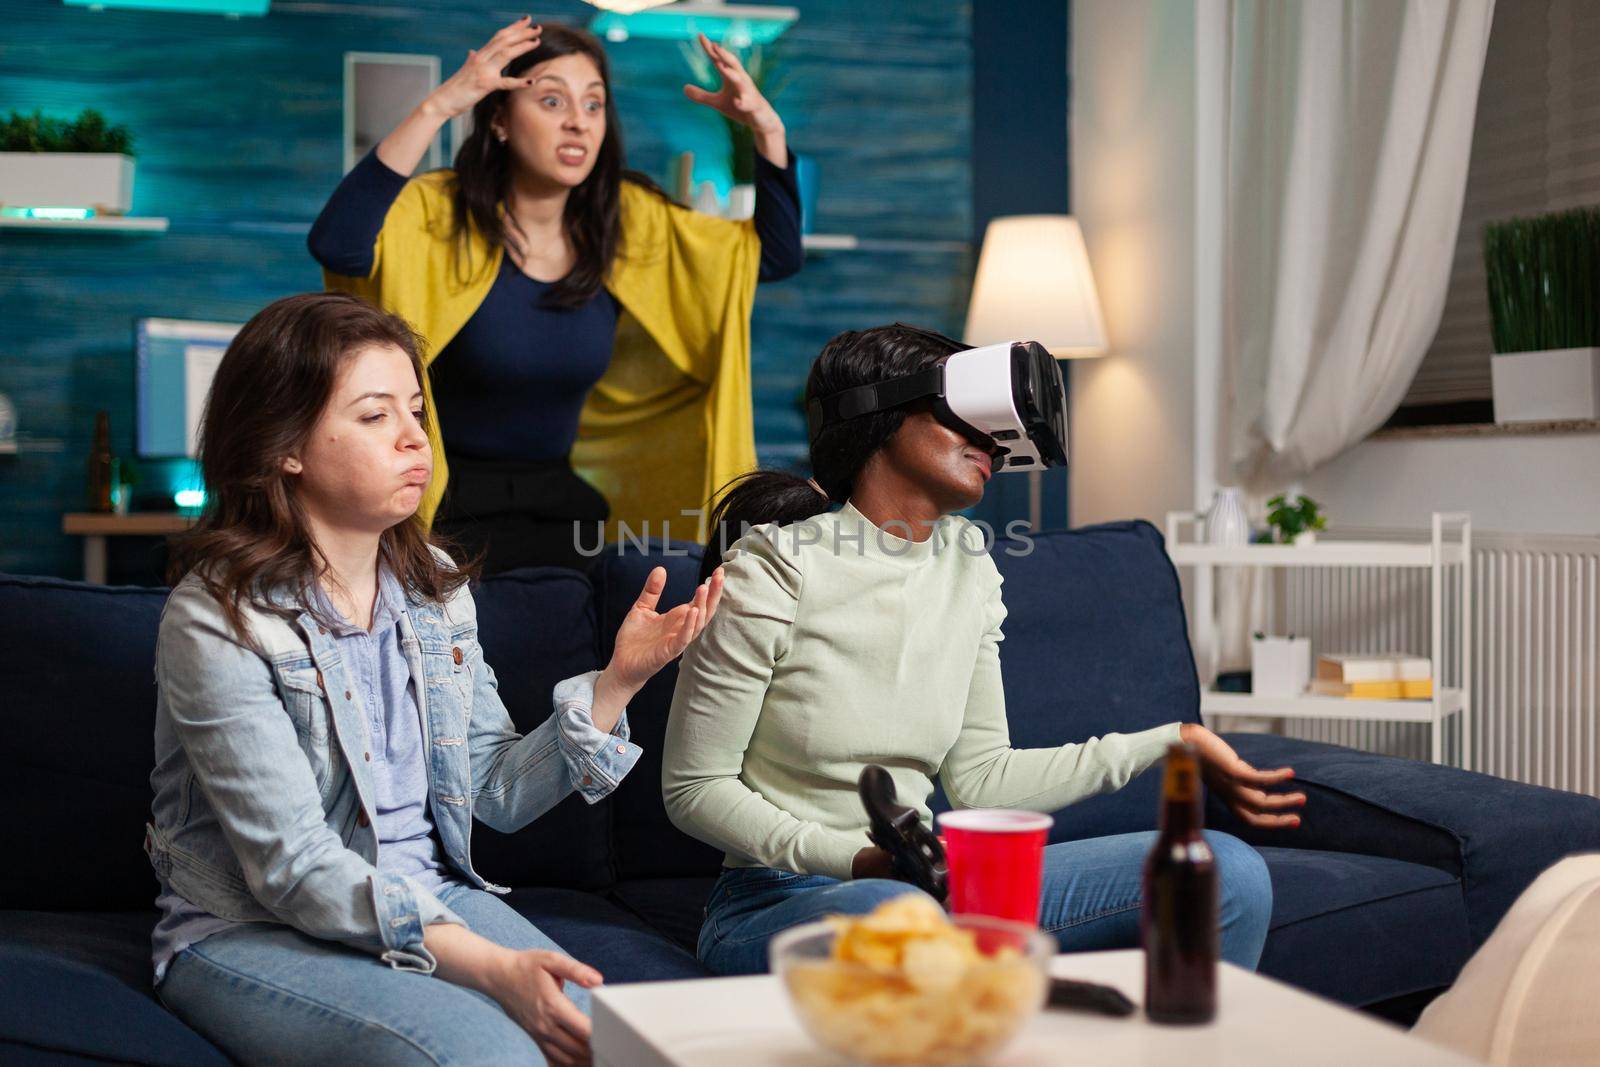 Upset multi ethnic women after losing while playing video games wearing virtual reality goggles. Mixed race group of people hanging out together having fun late at night in living room.